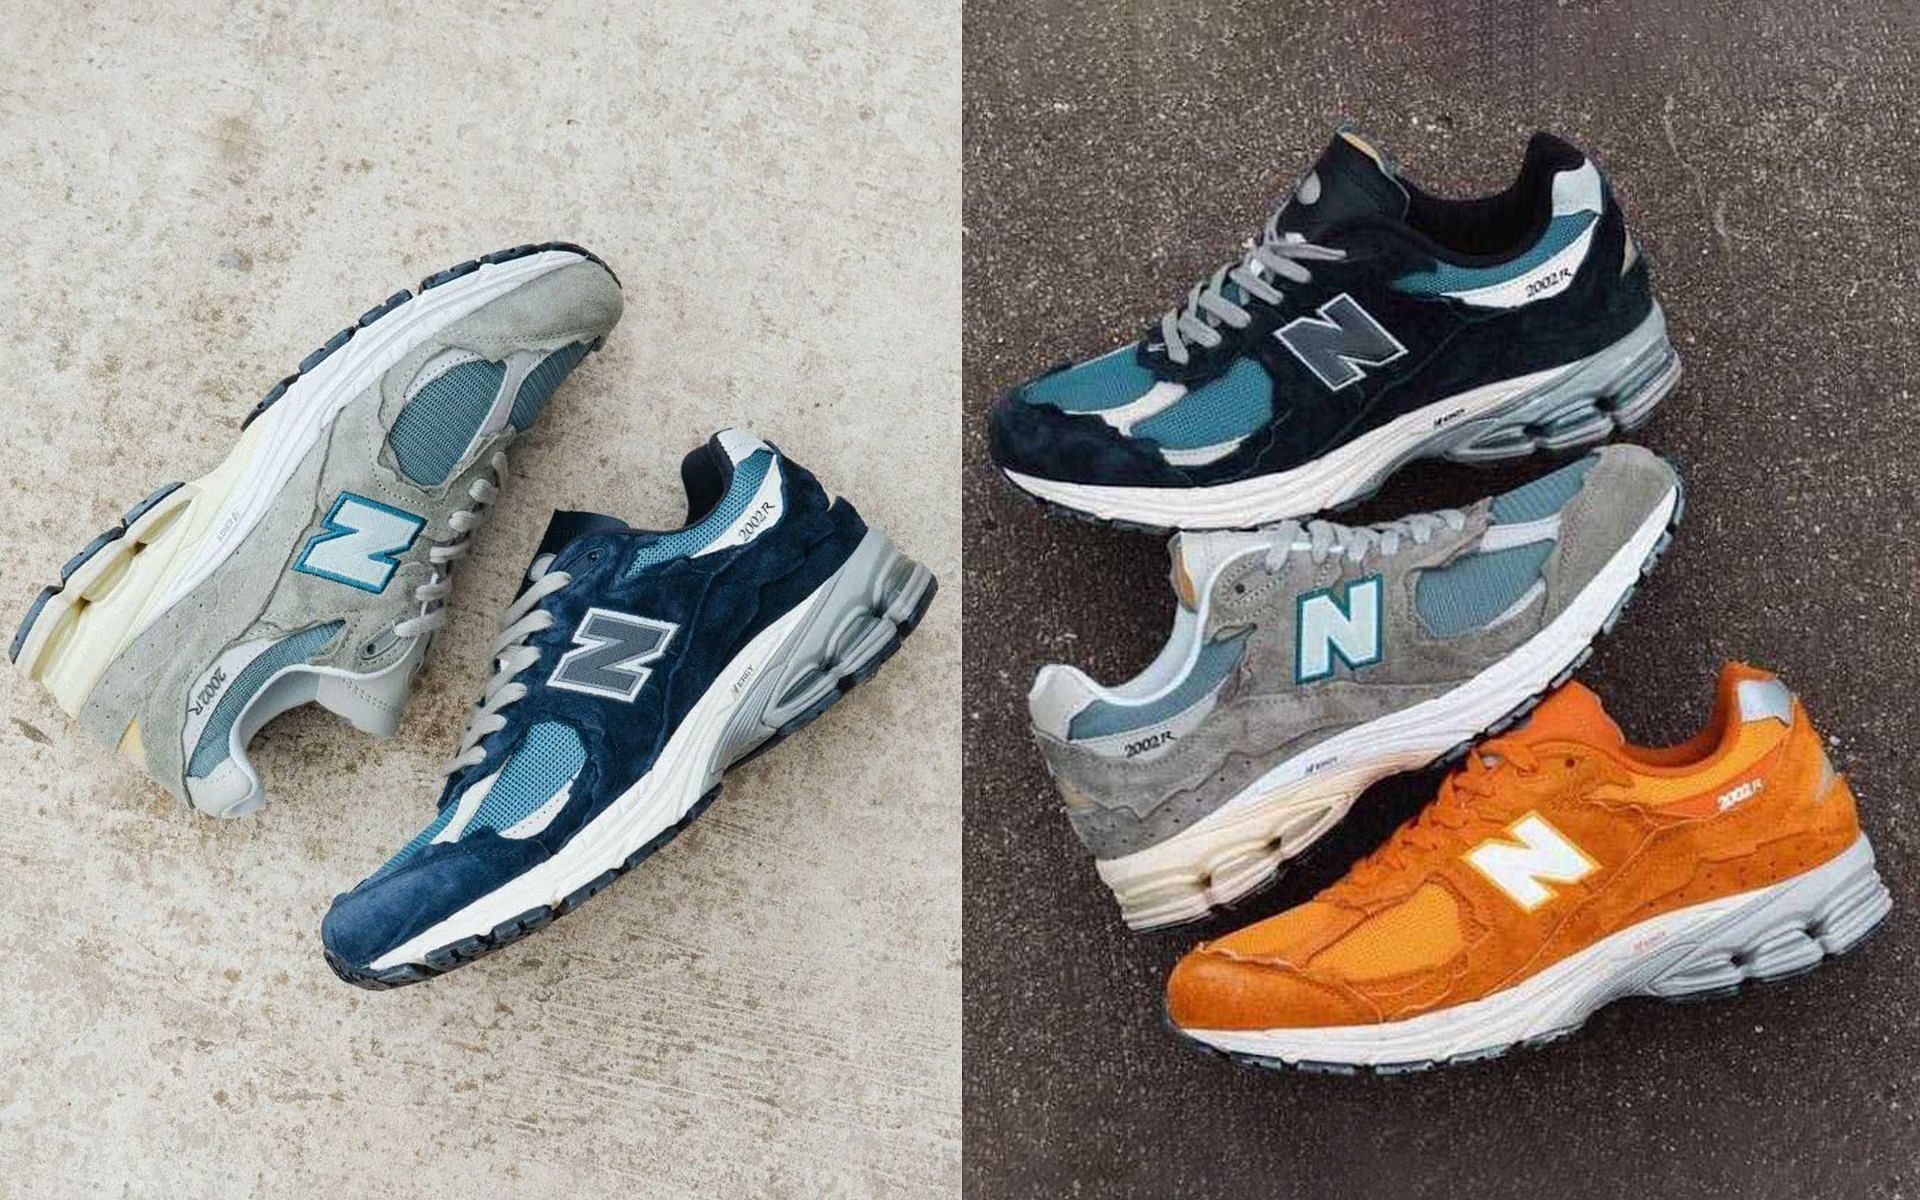 Three colorways released under Protection Pack 2022 (Image via NB)